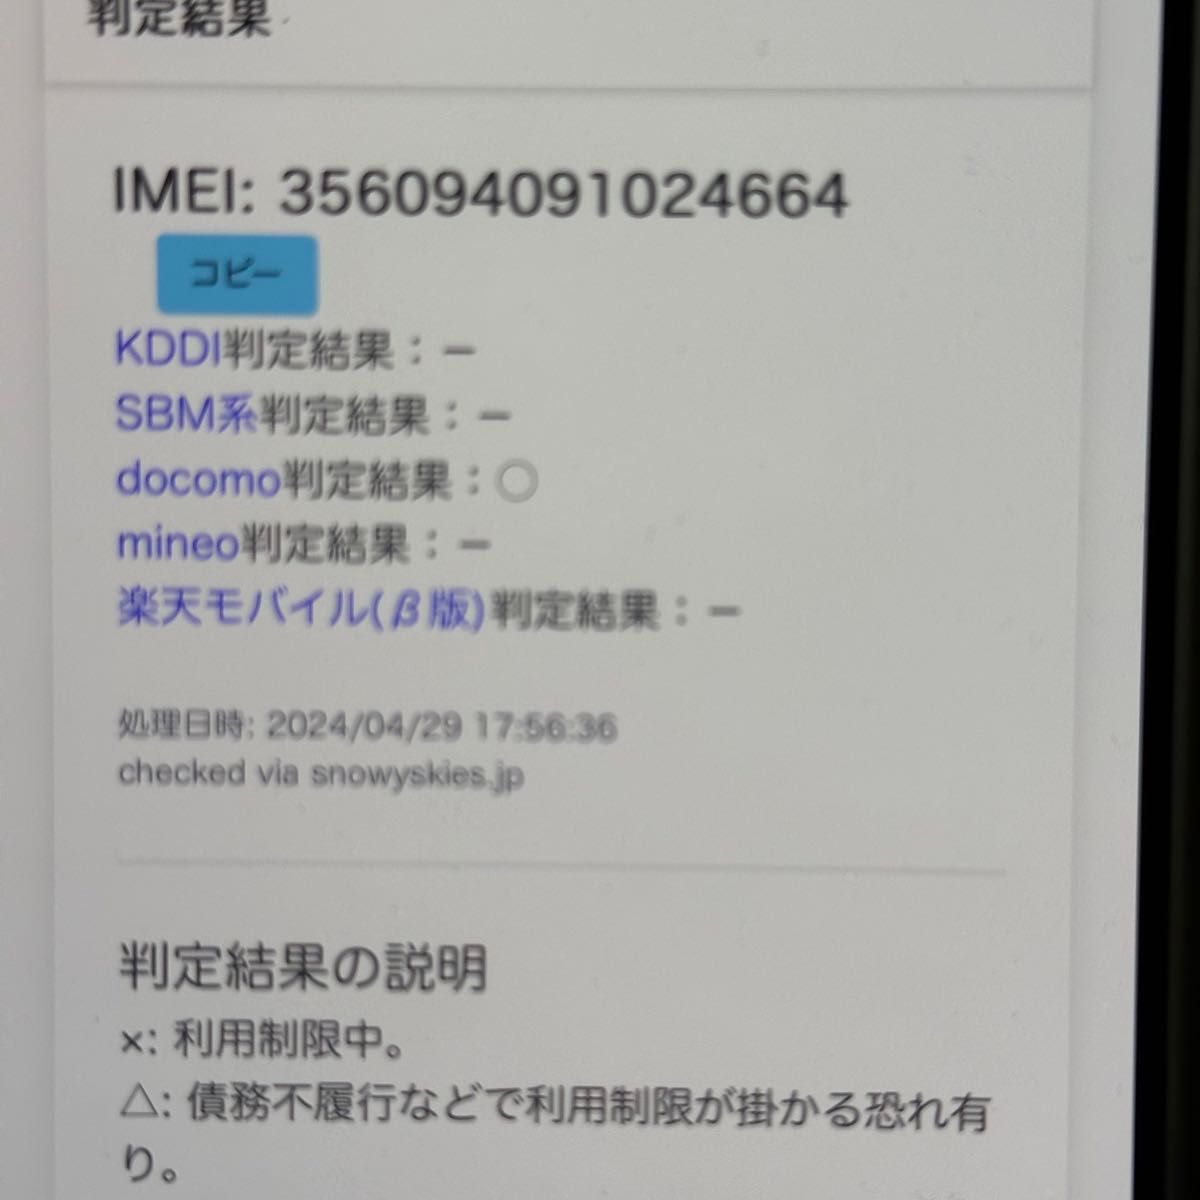 iPhone 8 64GB SIMロック解除済み　新しいバッテリー:100% Wi-Fi Bluetooth使えない　ジャンク